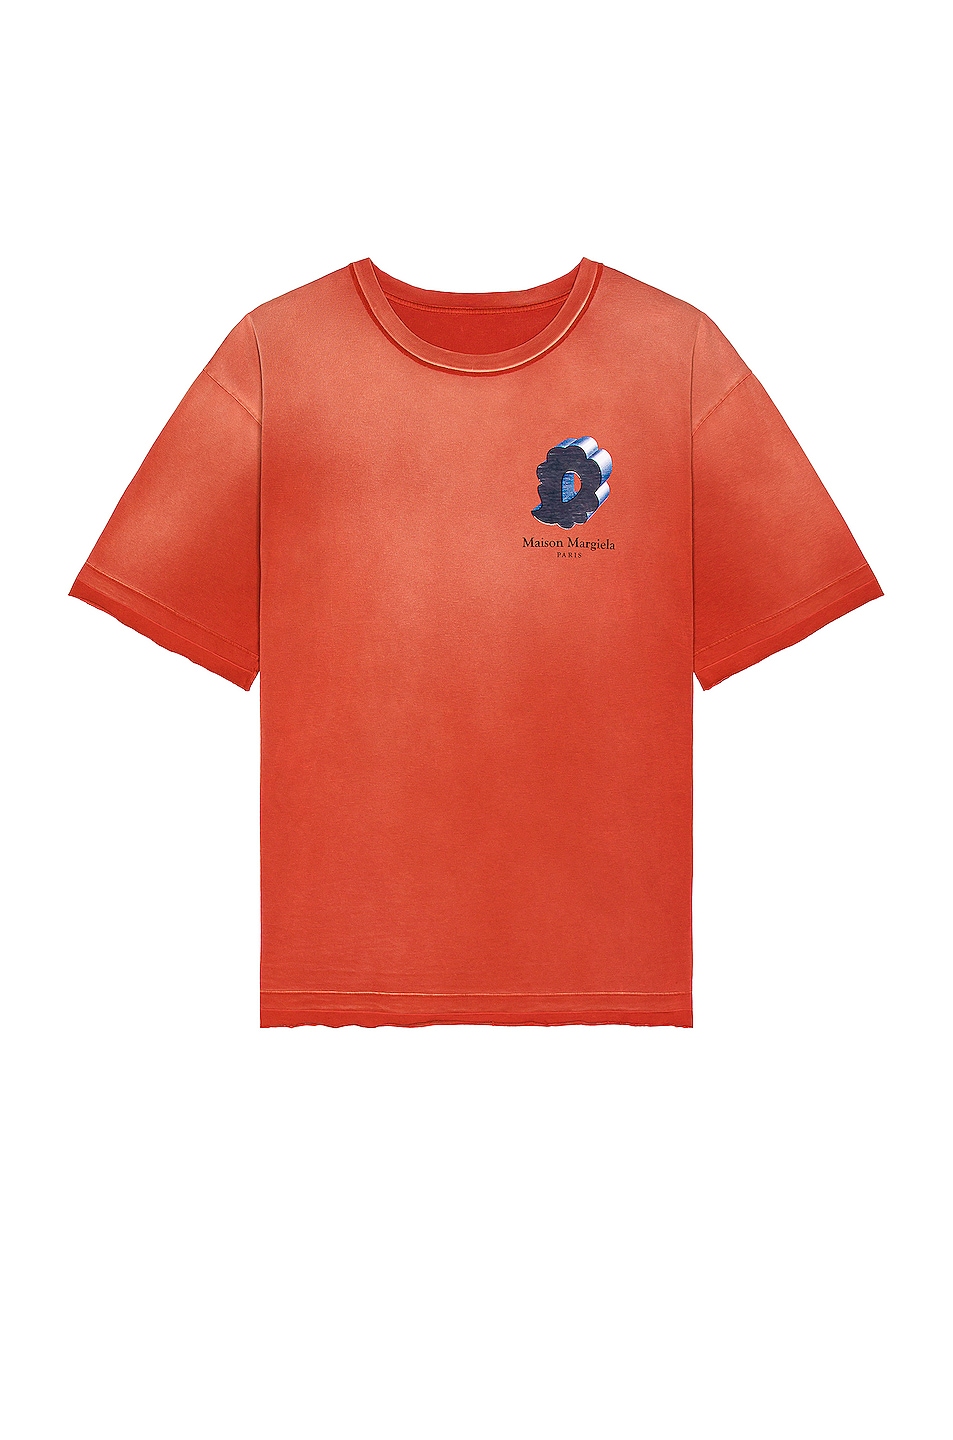 Image 1 of Maison Margiela T-Shirt in Dusty Brick Red